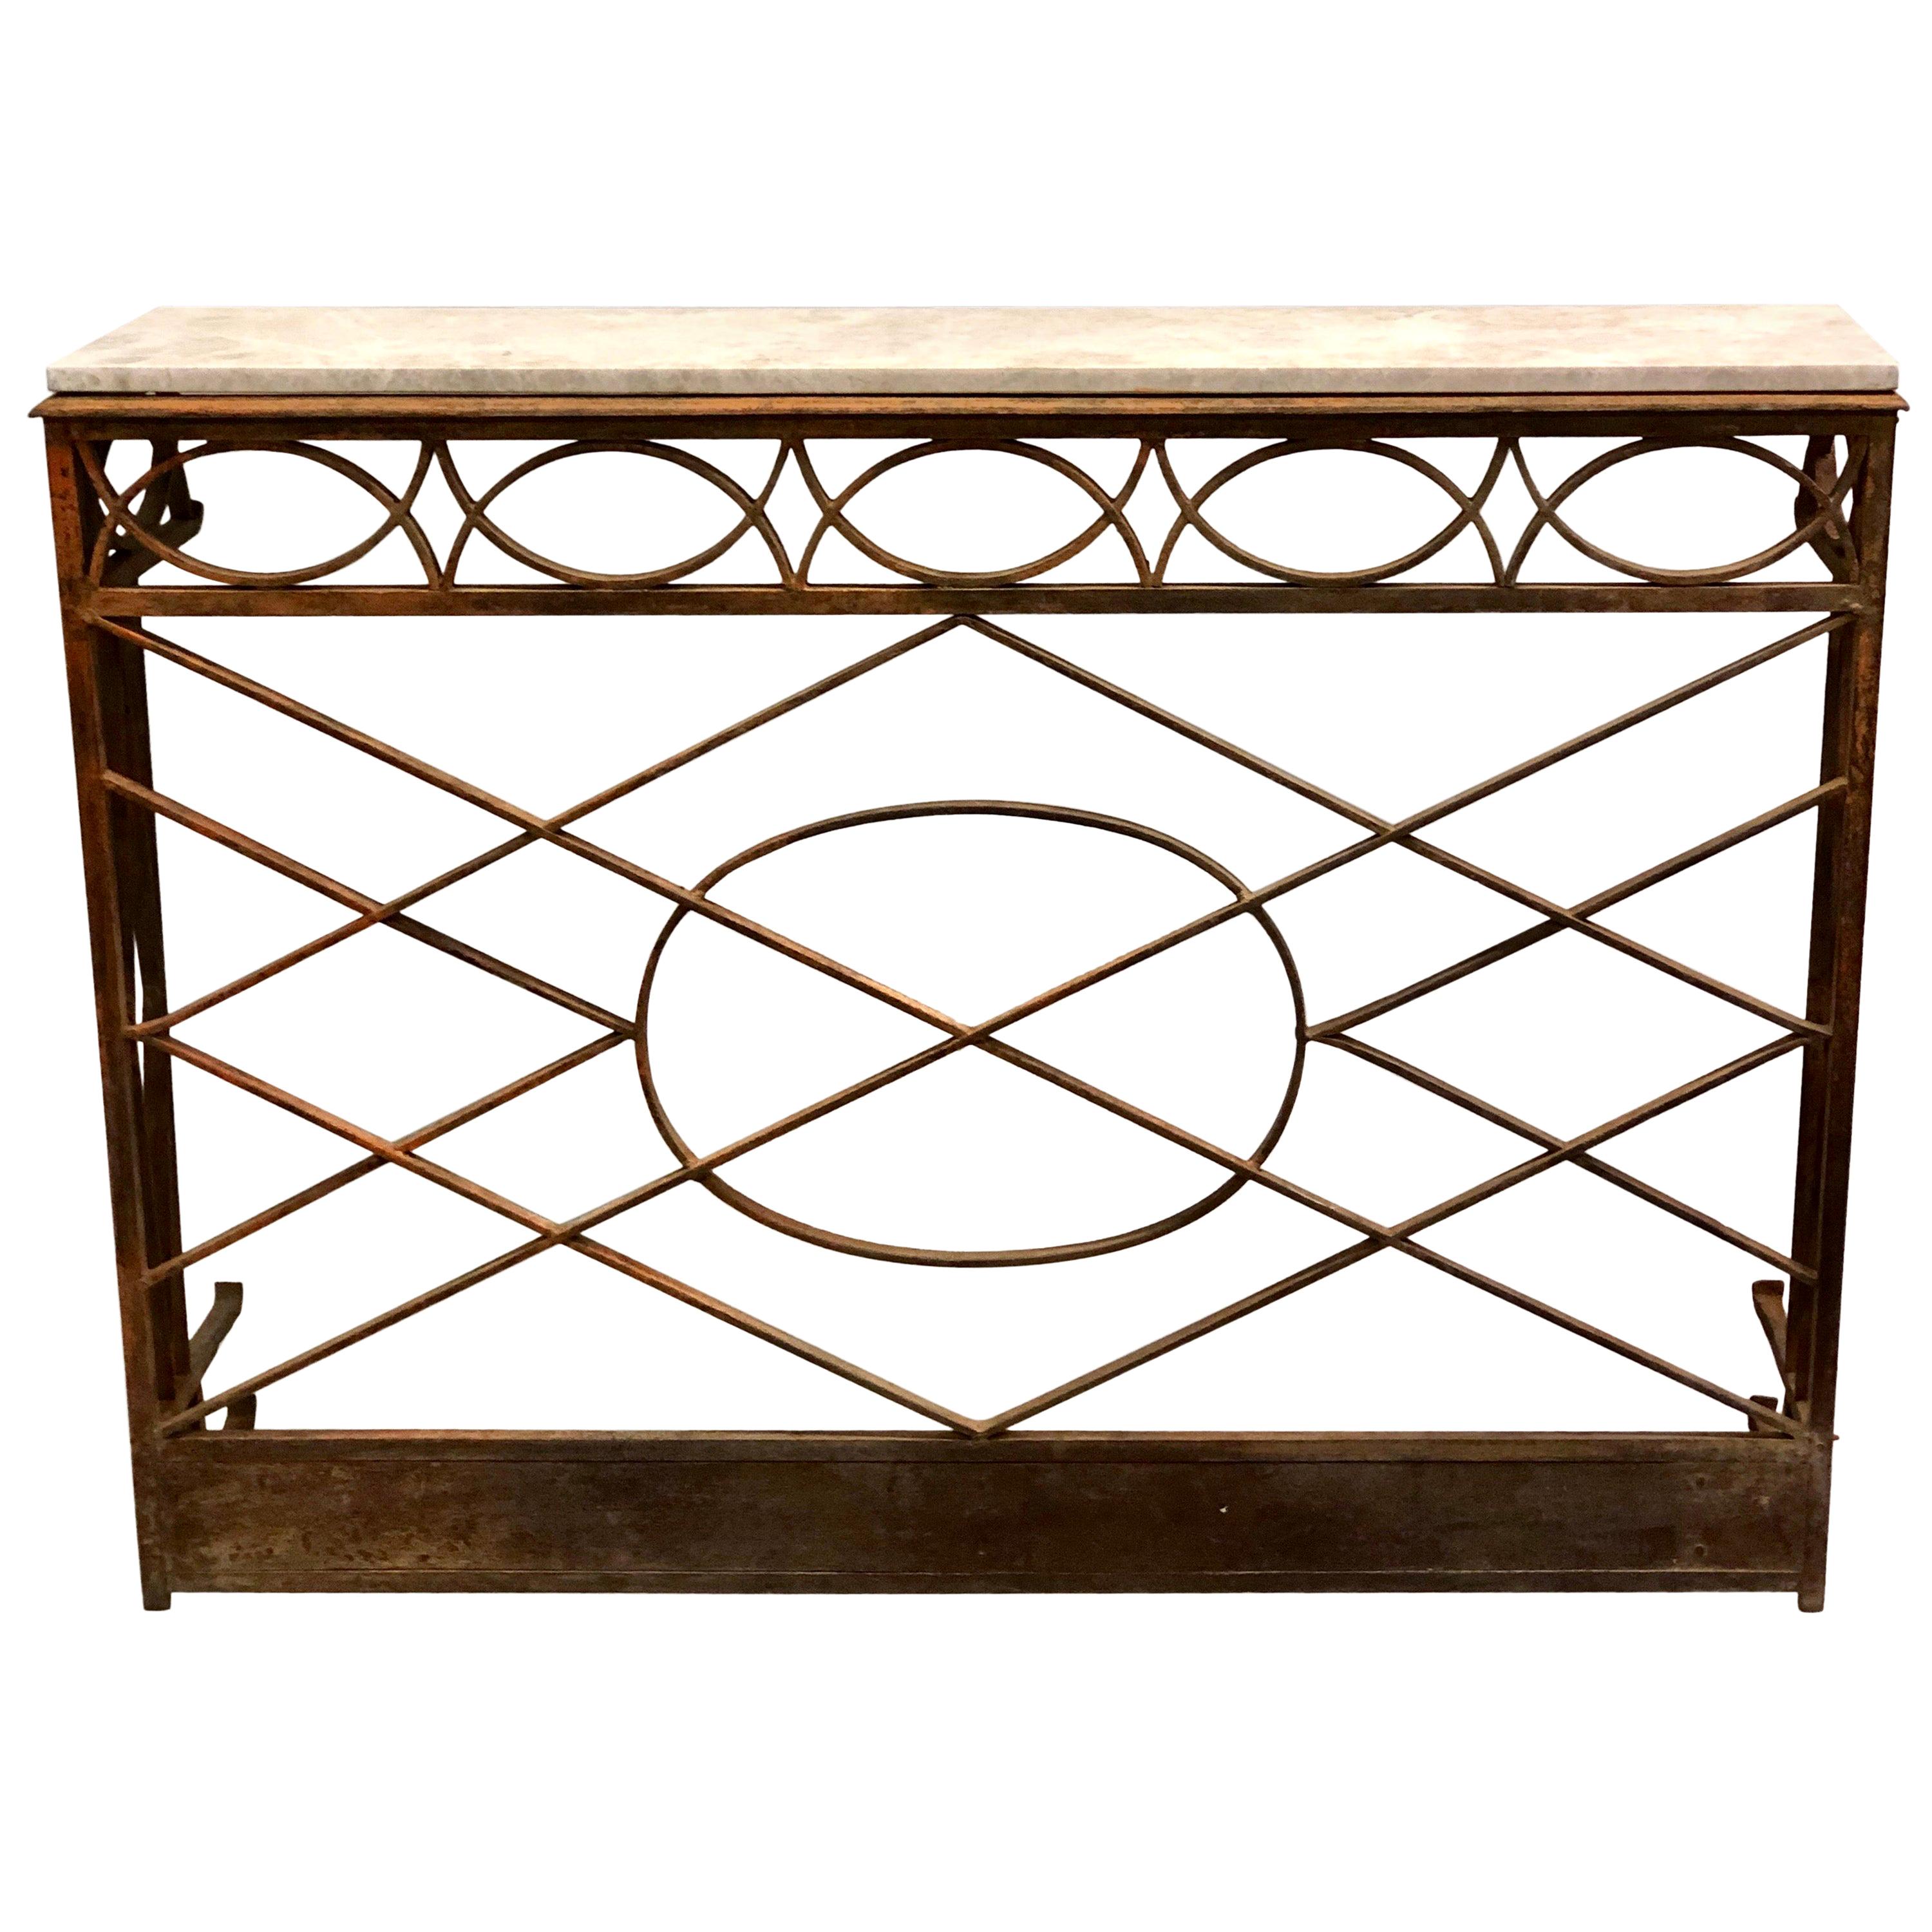 French Modern Neoclassical Wrought Iron and Limestone Console, circa 1860-1880 For Sale